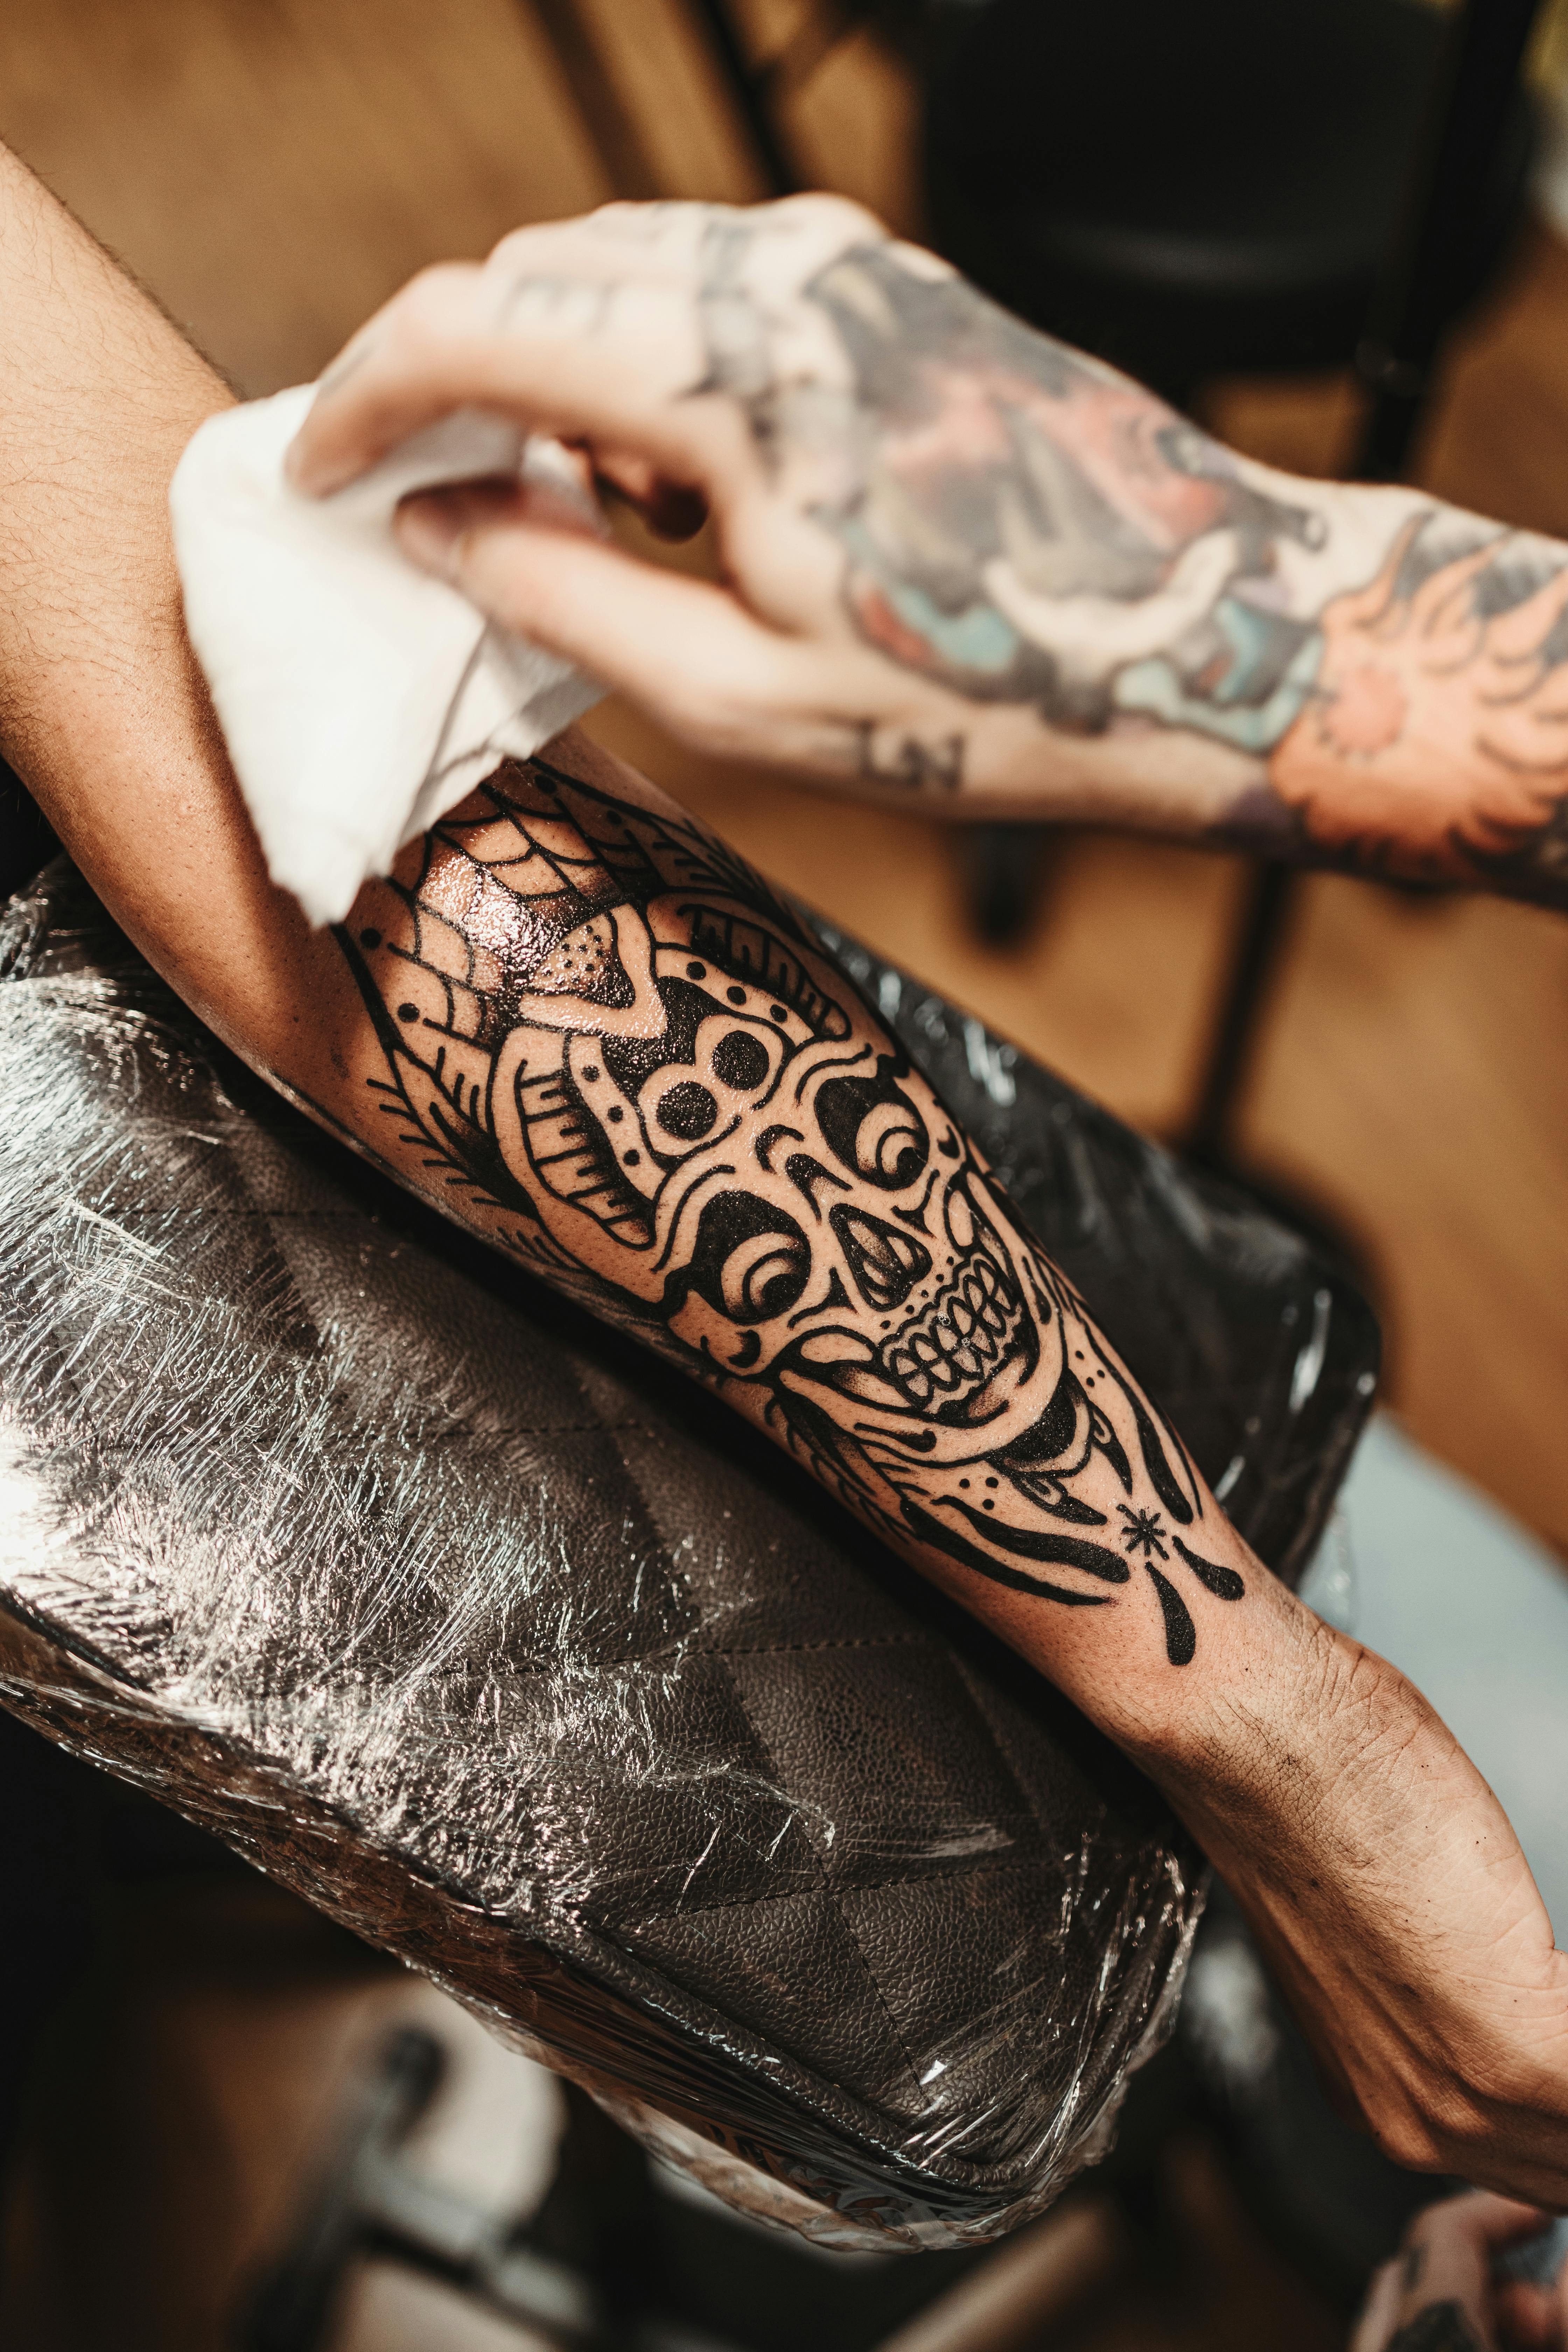 Skull Tattoo On The Arm Of A Man Free Stock Photo